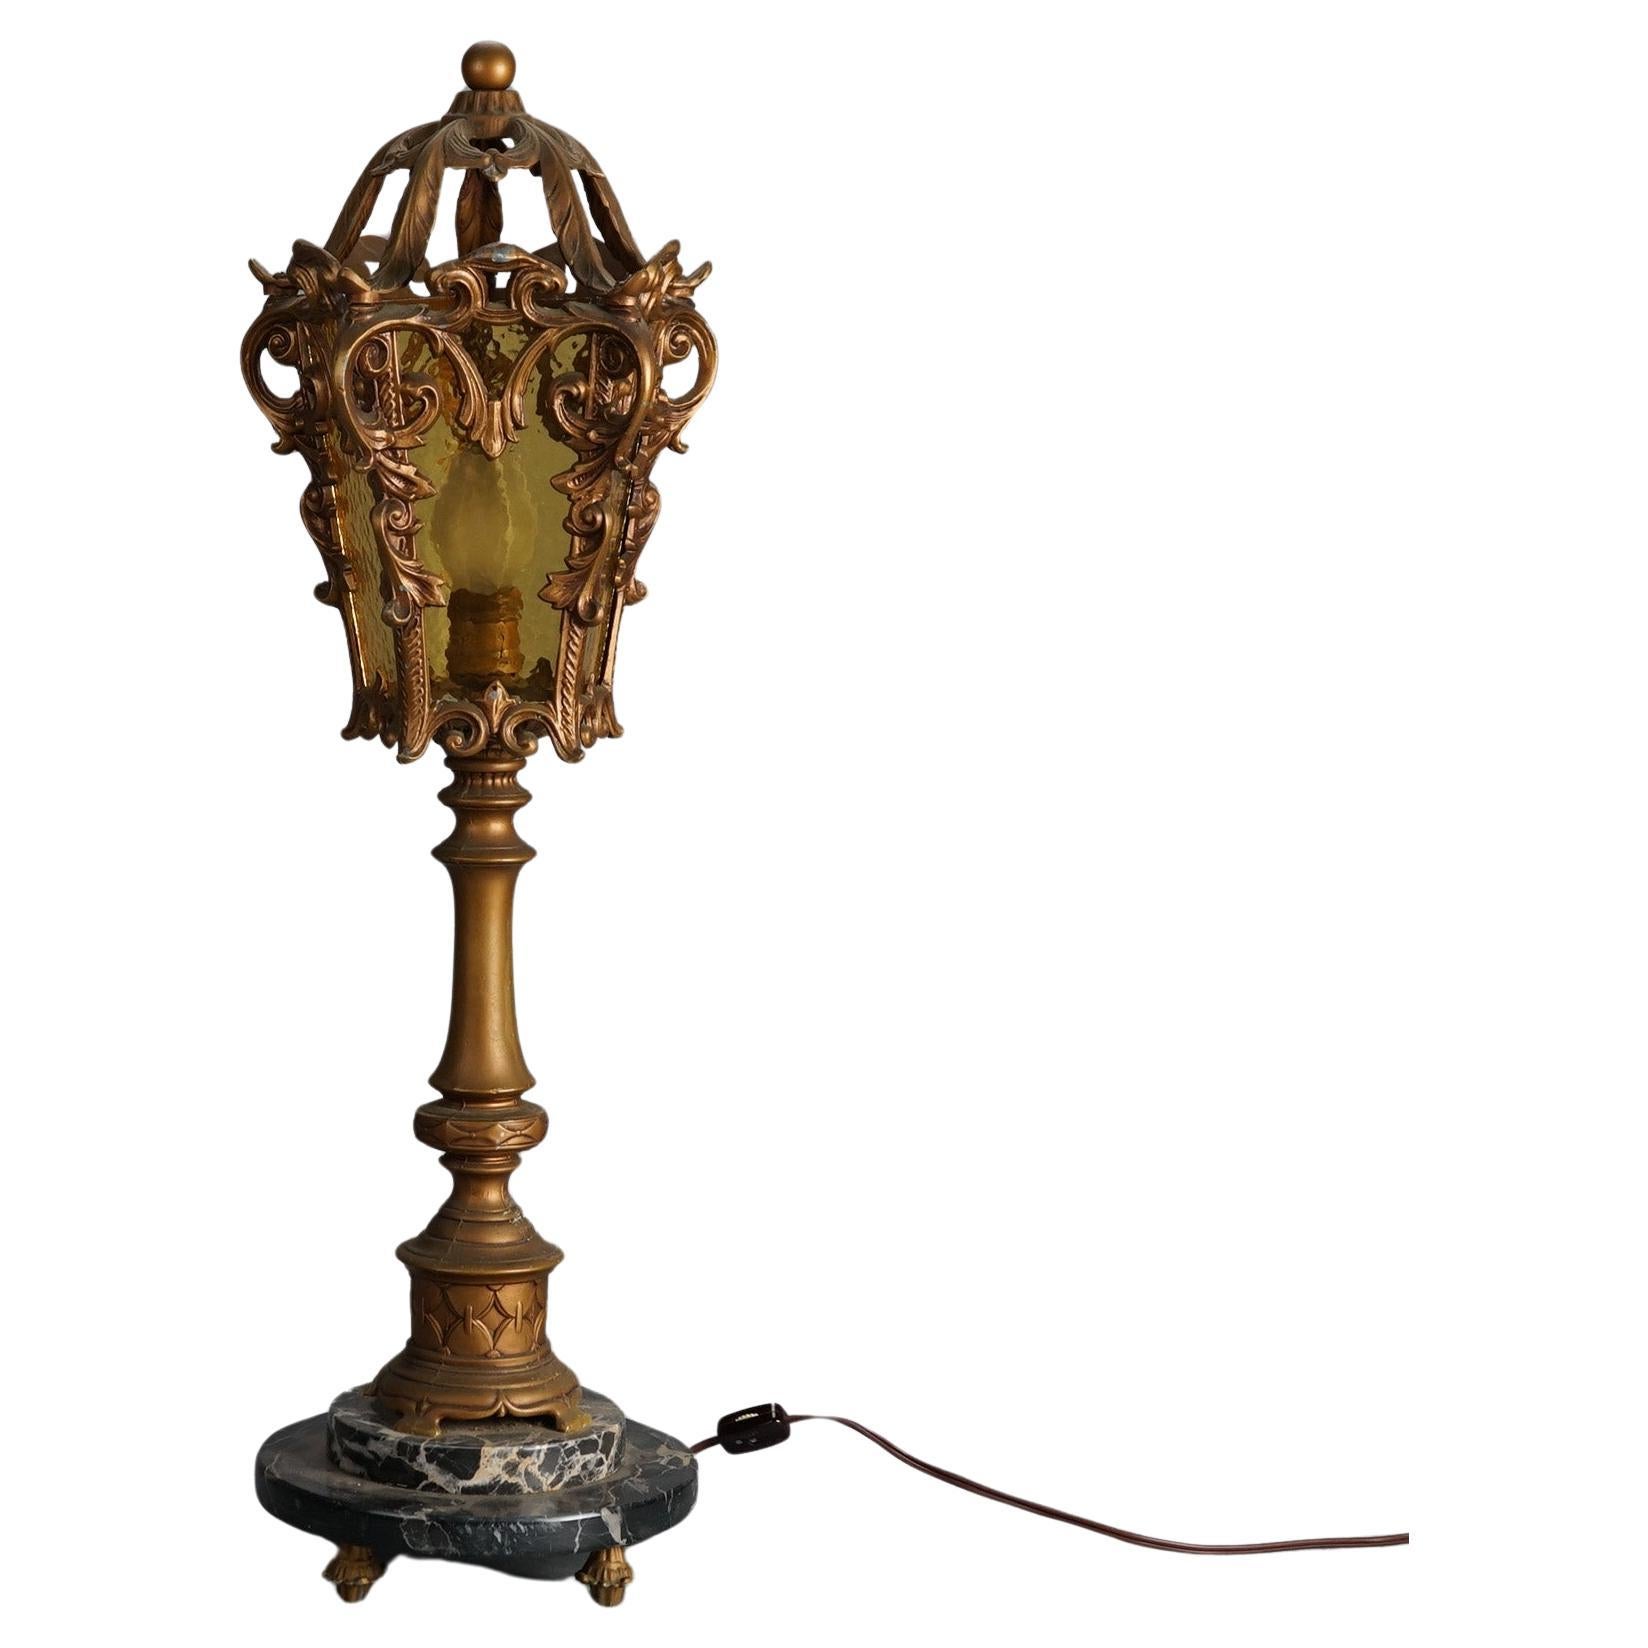 Antique Arts & Crafts Hammered Amber Glass Torchiere Table Lamp c1920 For Sale